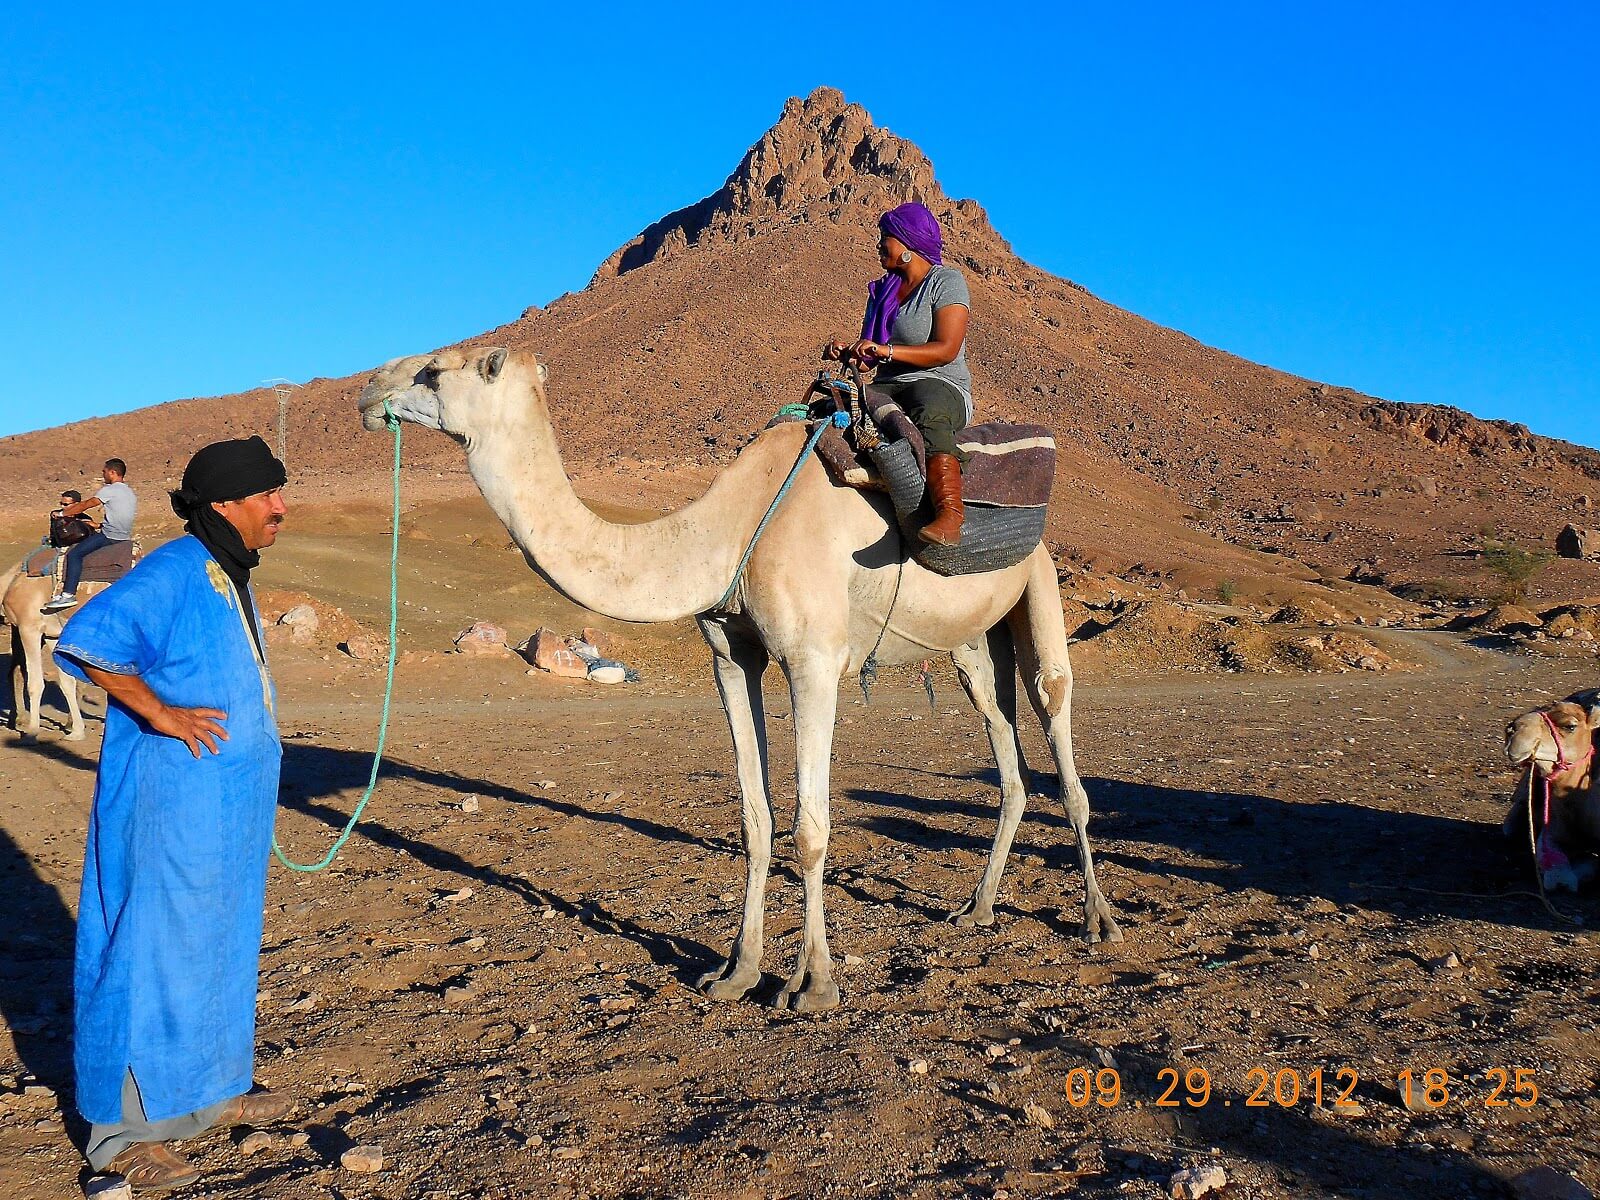 Marrakech Excurions, Morocco Desert Tour from Marrakech in private | Zagora in 2 Days